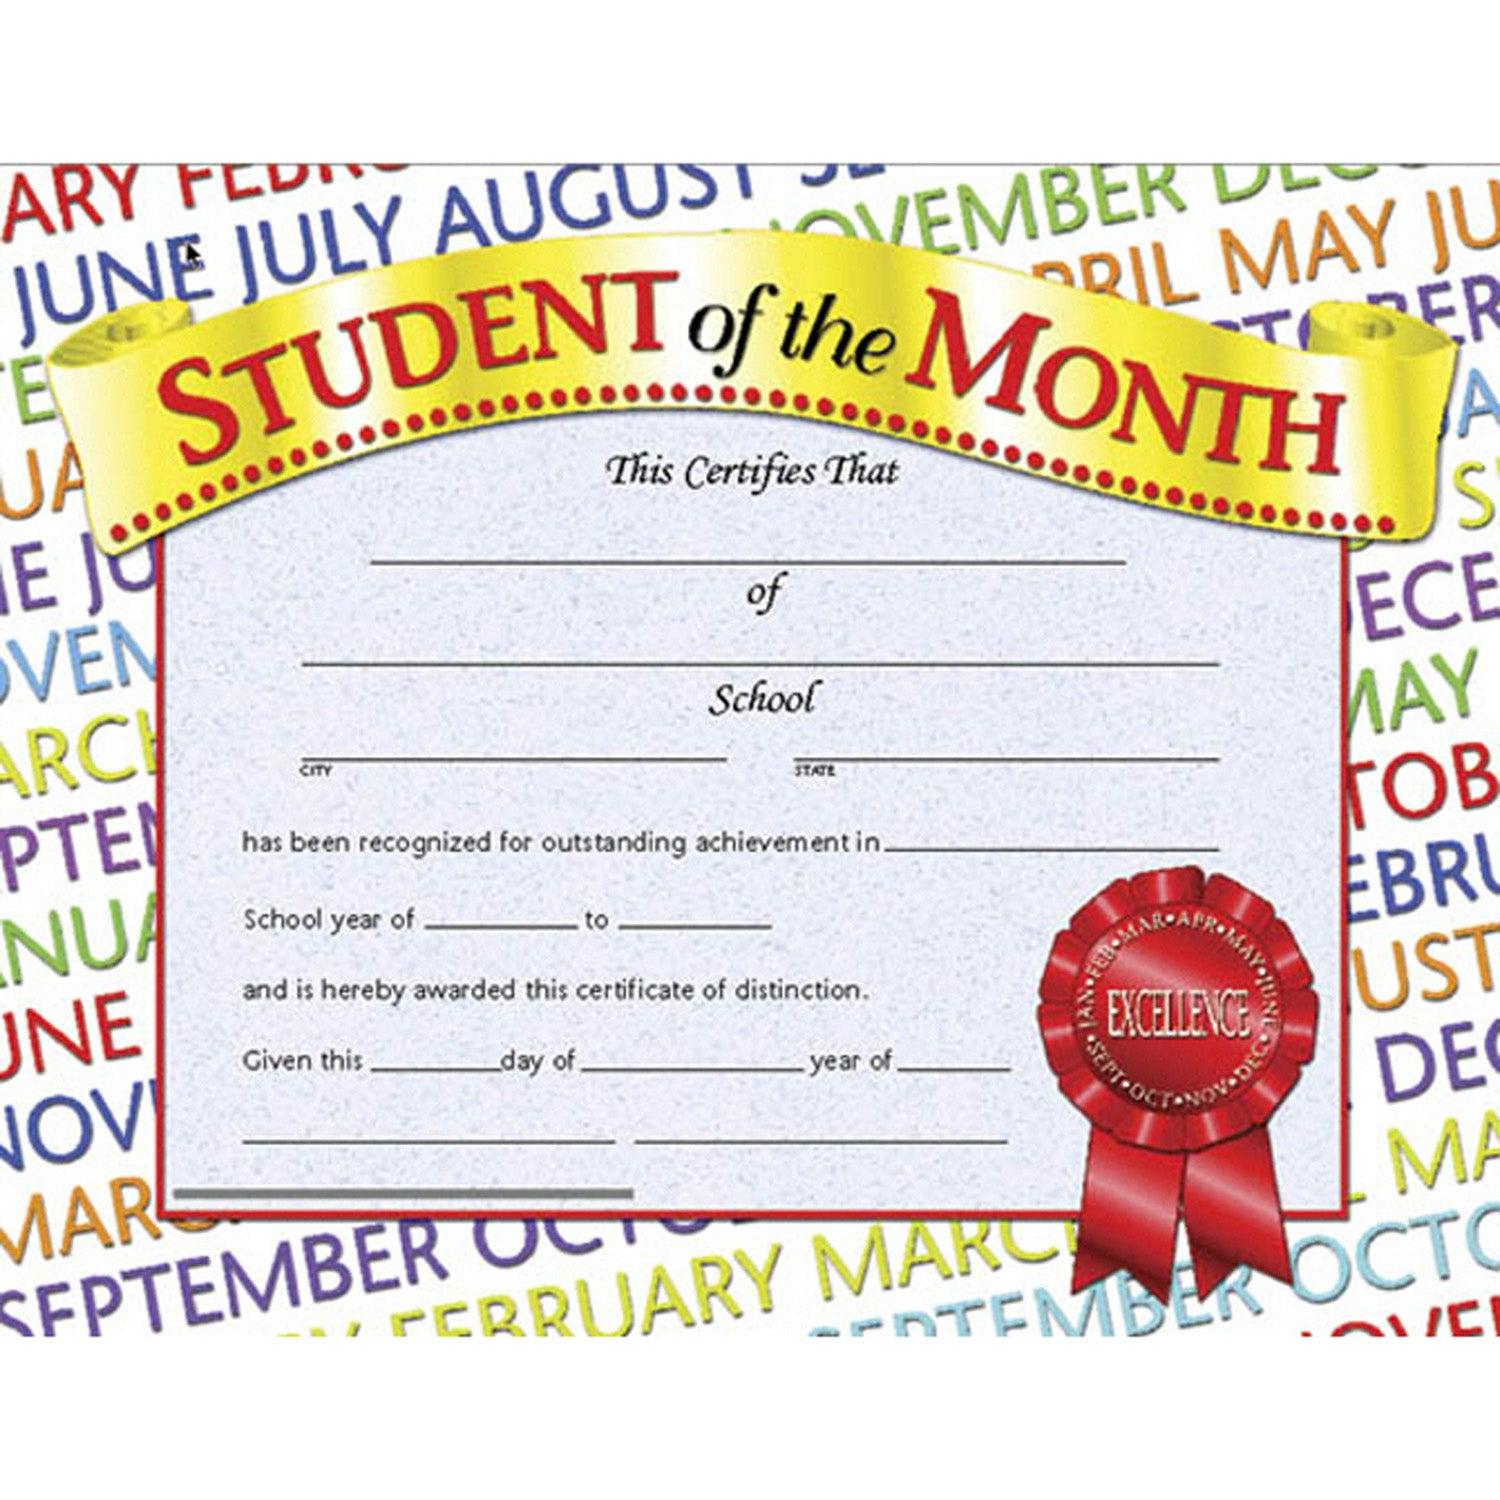 Student of the Month Certificate, 8.5" x 11", 30 Per Pack, 3 Packs - Loomini